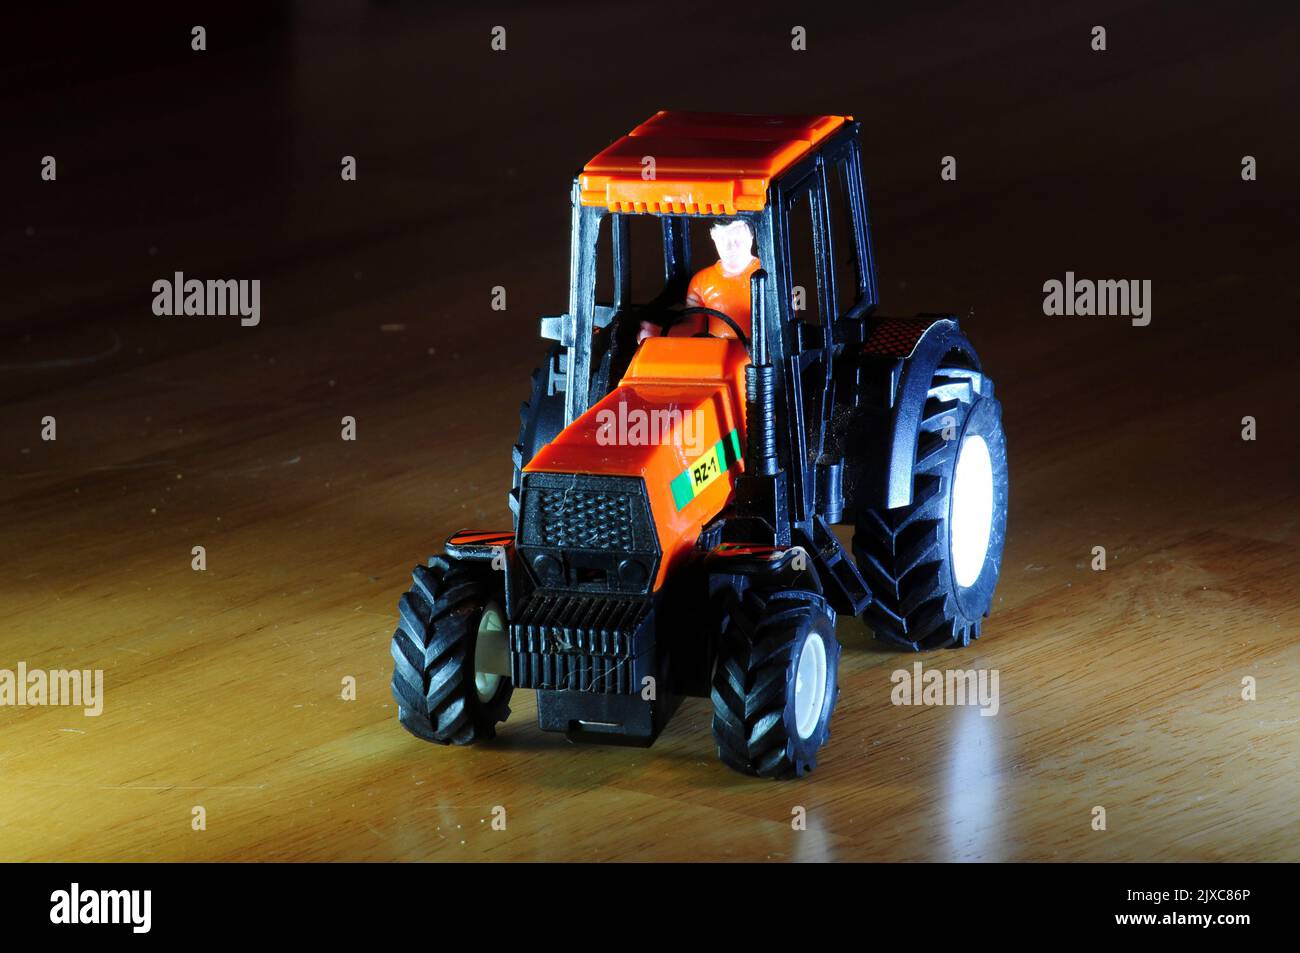 Toy tractor with driver inside Stock Photo